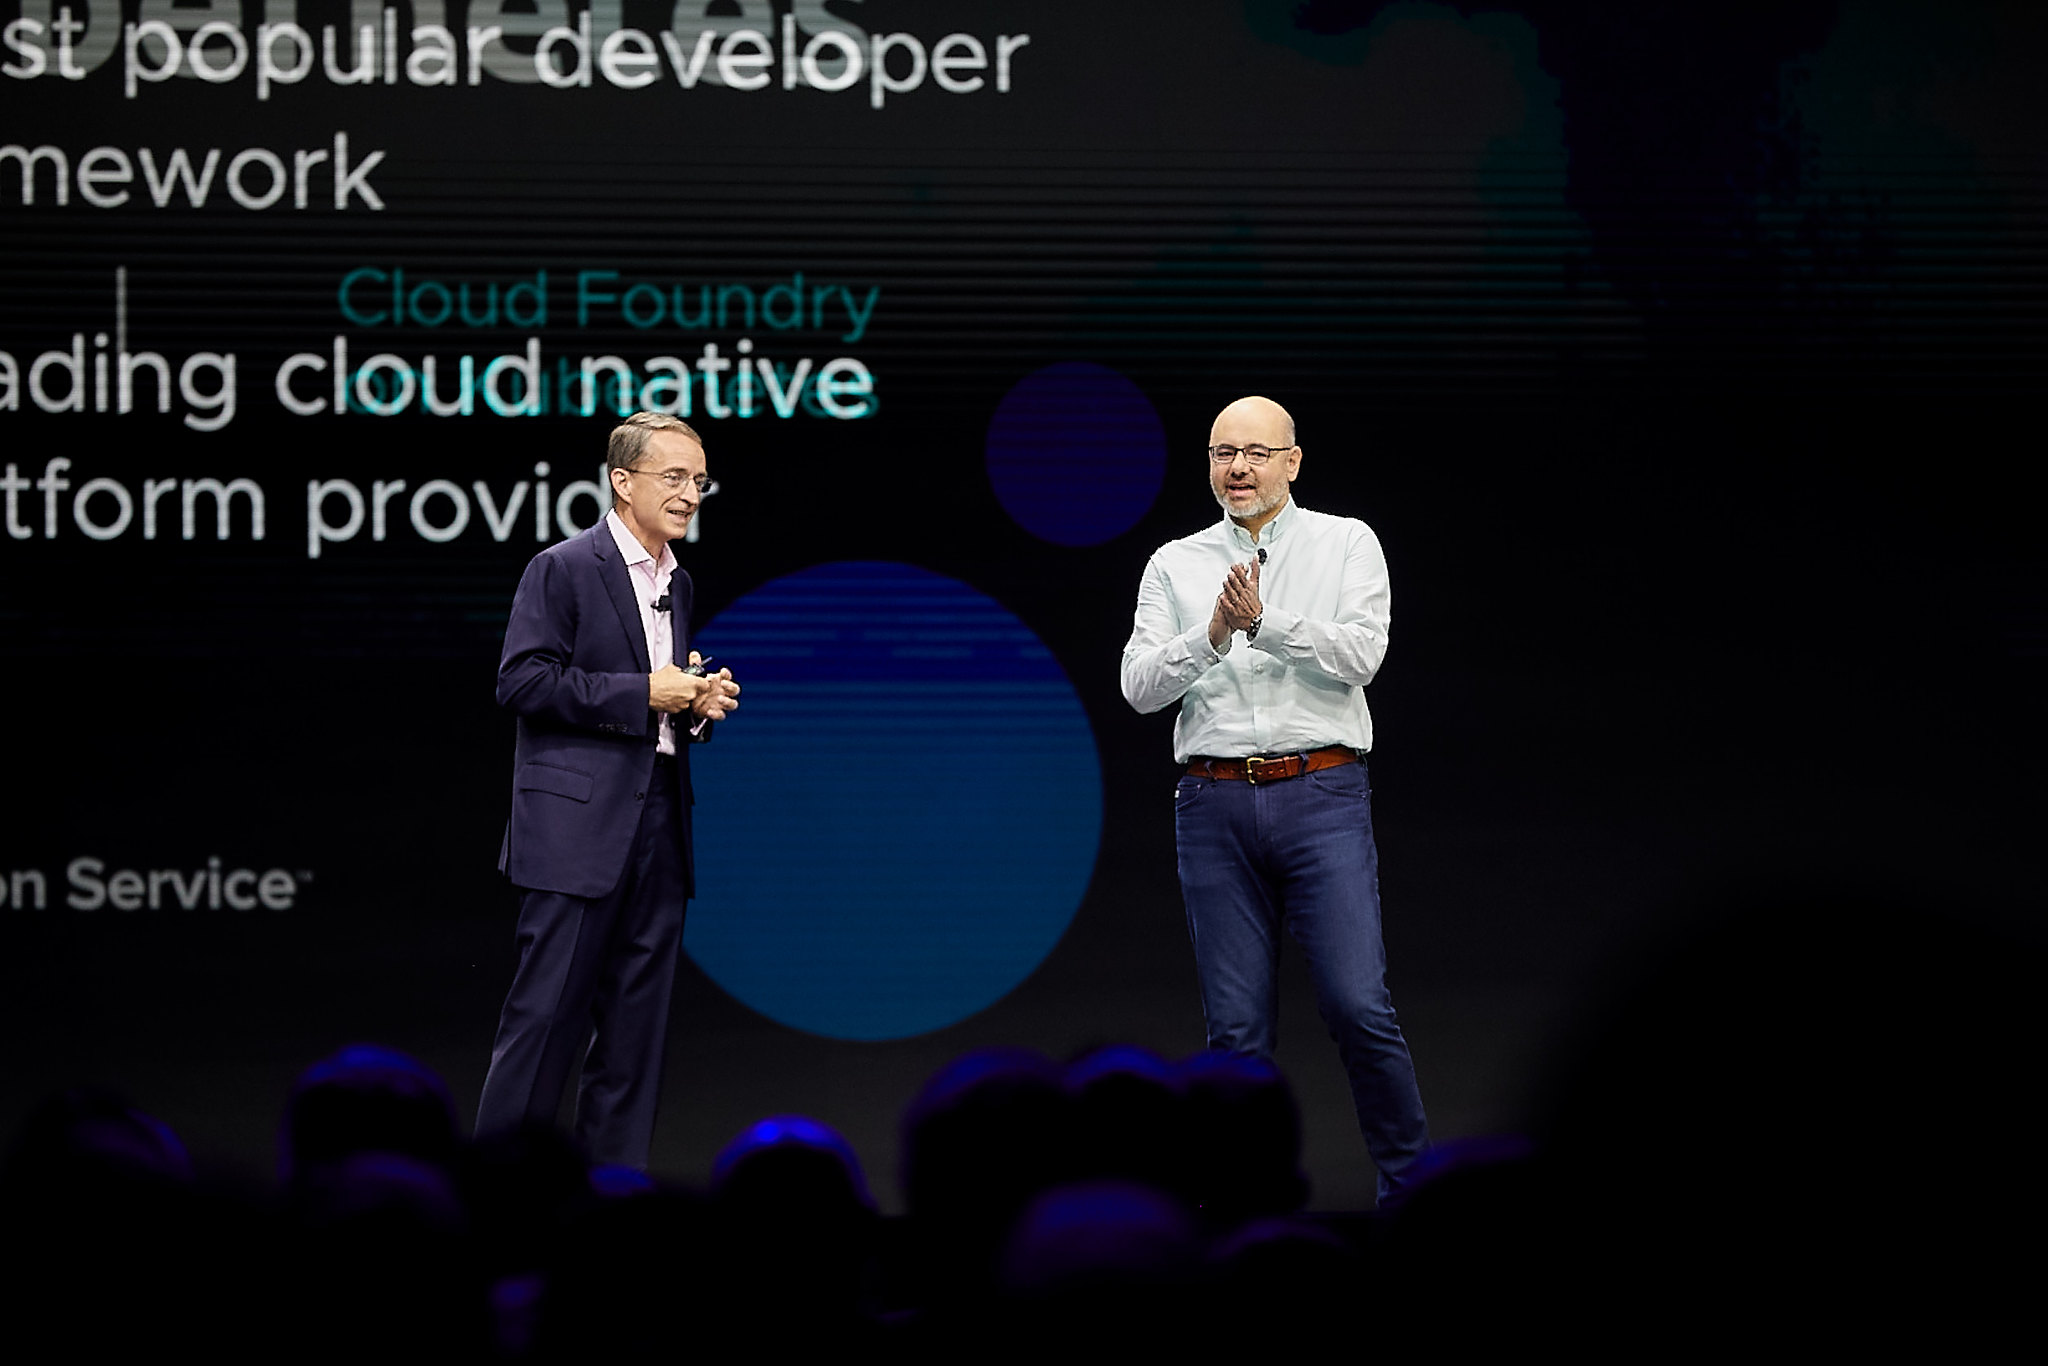 VMware CEO Pat Gelsinger (left) on stage at VMworld 2019 with Joe Beda, a principal engineer at VMware and one of the three original creators of Kubernetes.